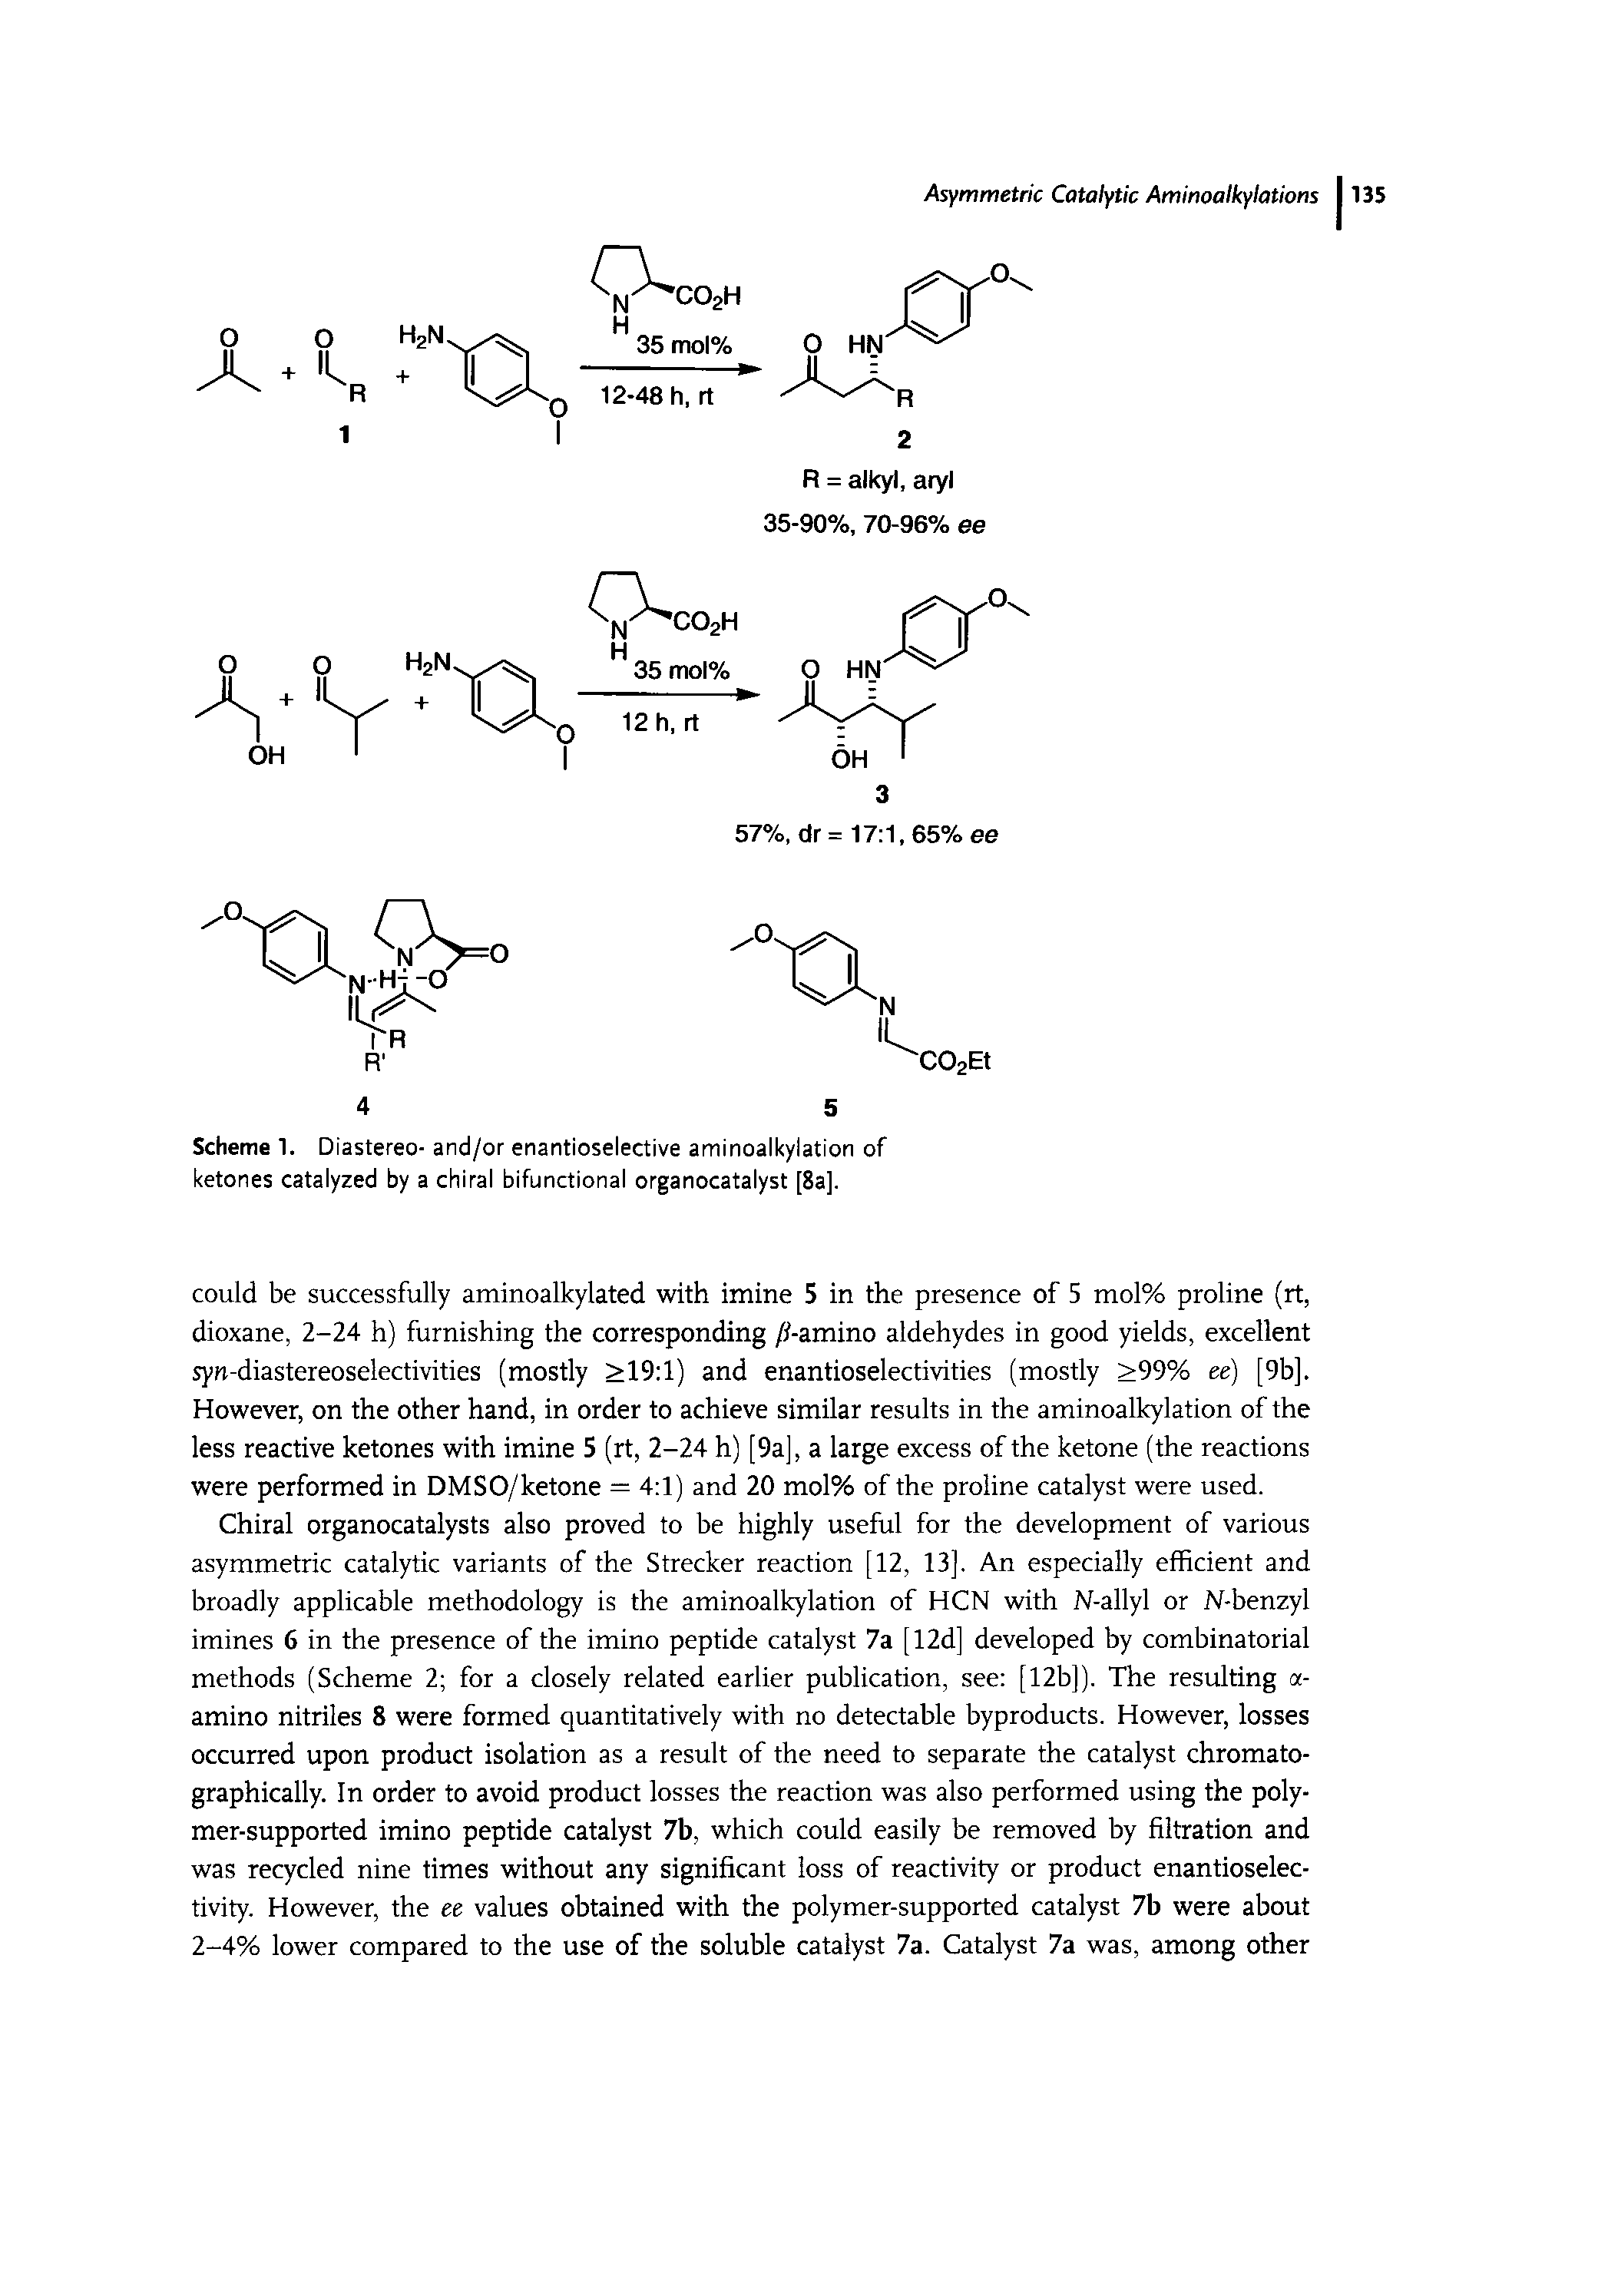 Scheme 1. Diastereo- and/or enantioselective aminoalkylation of ketones catalyzed by a chiral bifunctional organocatalyst [8a].